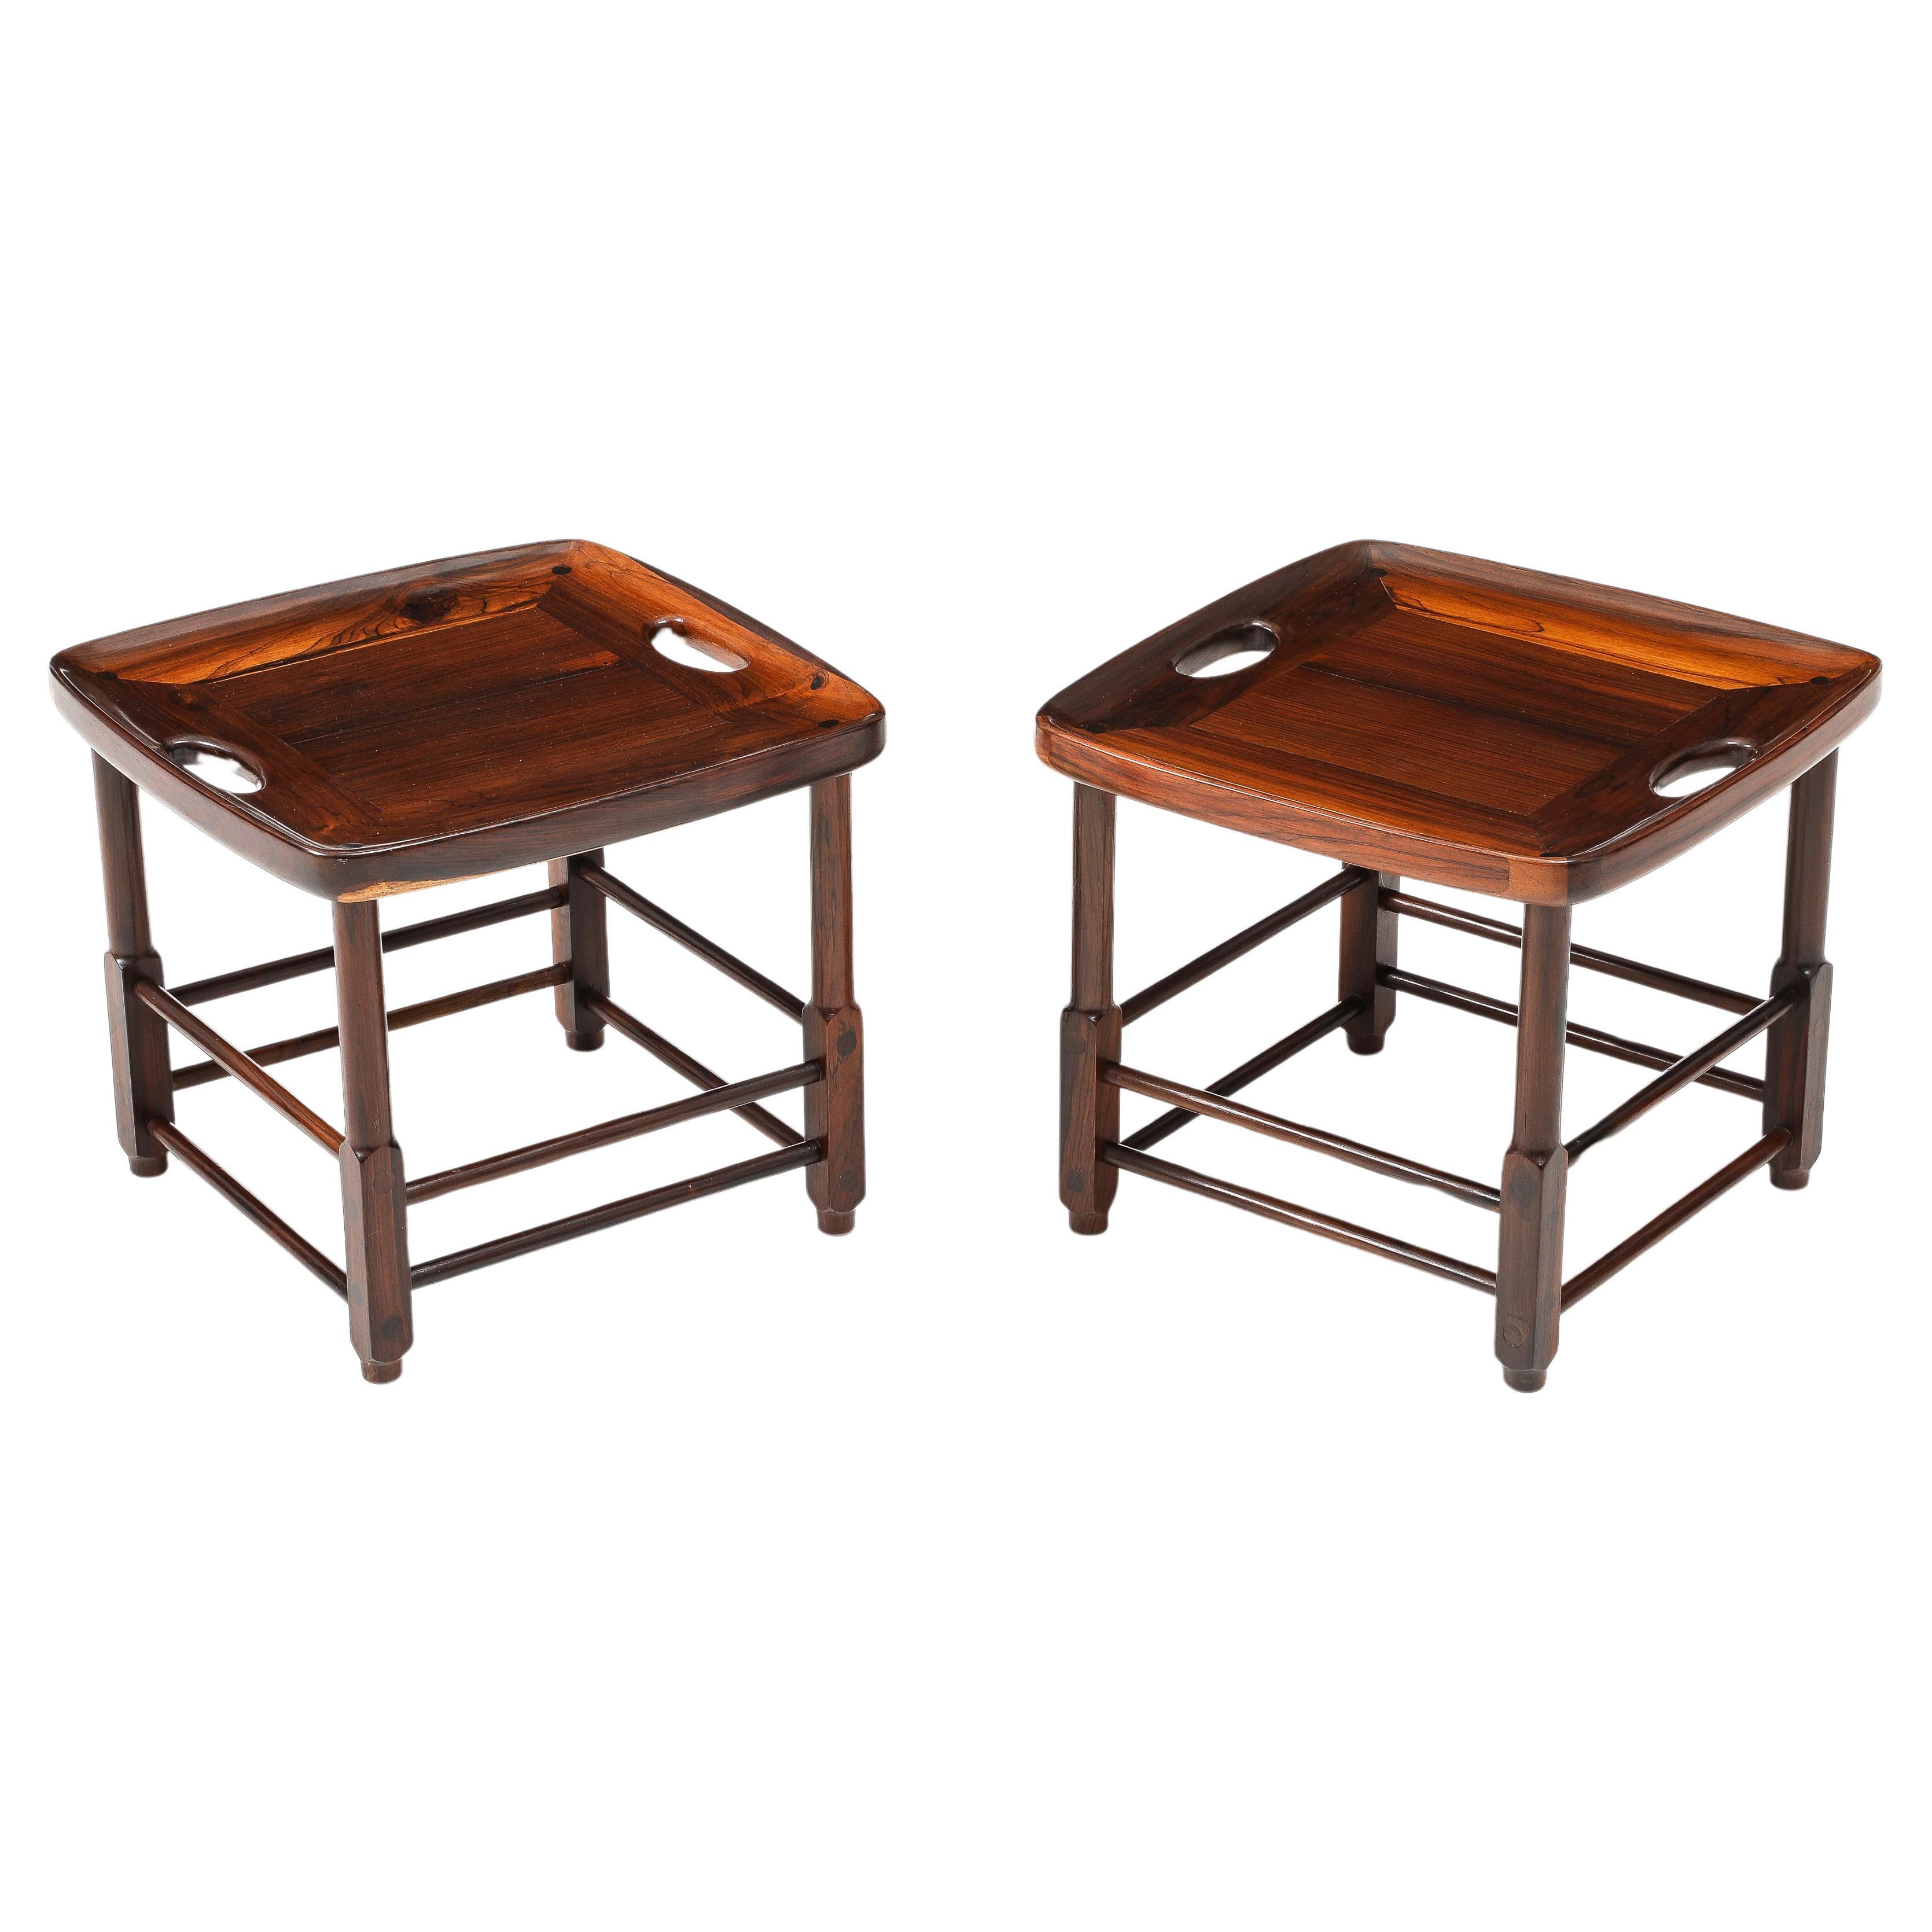 Mid-Century Modern Pair of "Magrini" Stools by Sergio Rodrigues, Brazil, 1960s